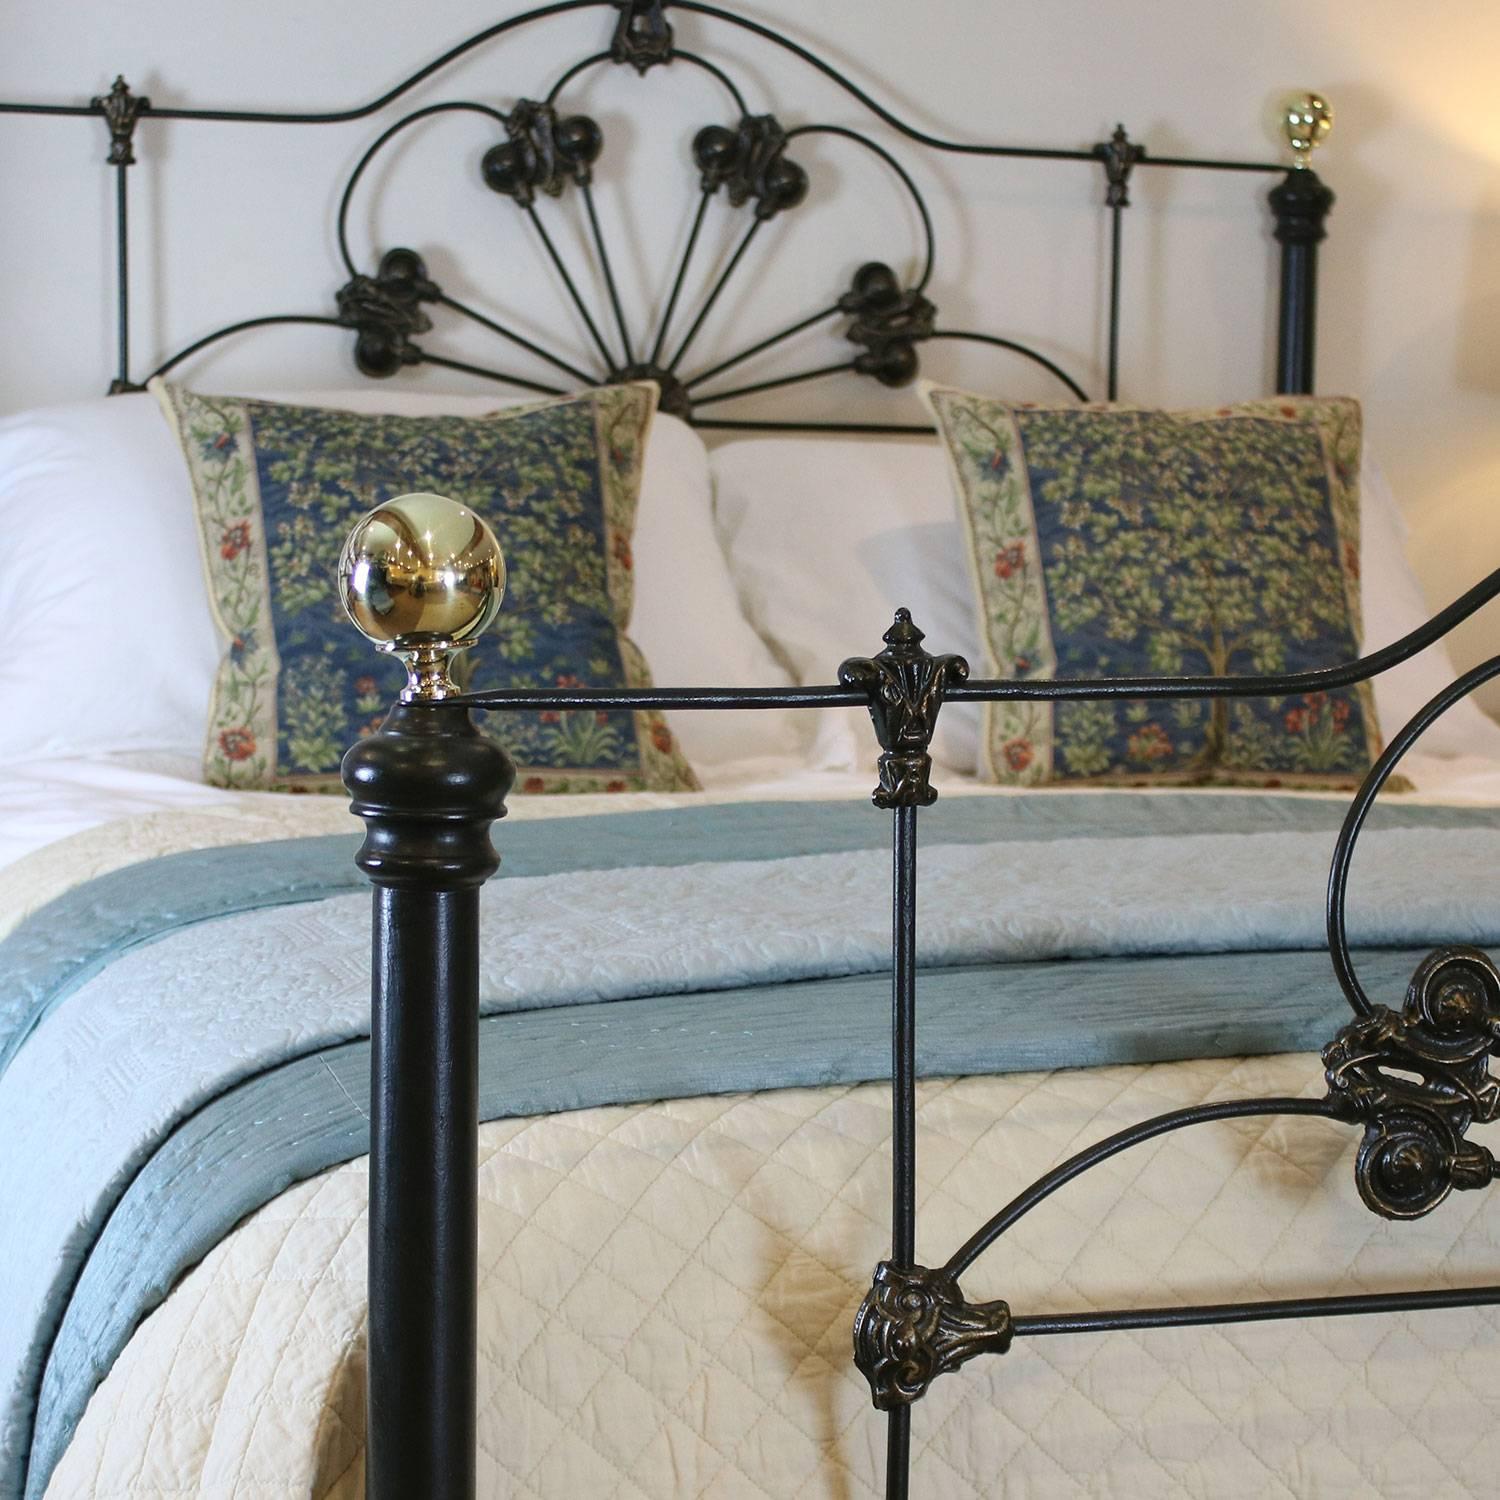 A cast iron antique bed with decorative castings and attractive design finished in olive green with gold highlights.

This bed accepts a British king-size or US queen-size (5ft, 60 inches or 150cm wide) base and mattress set.

The price is for